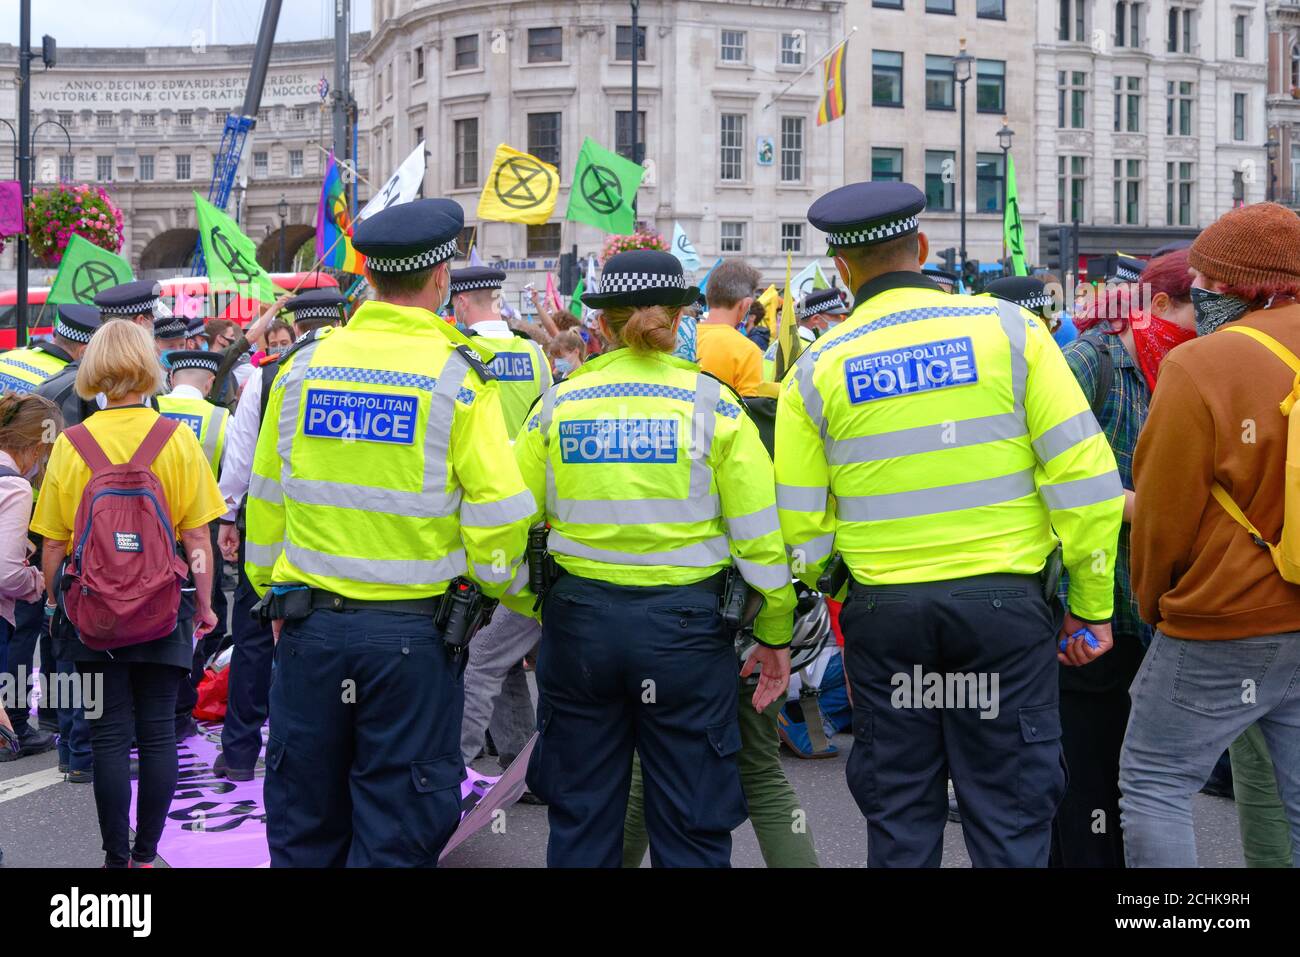 Metropolitan police controlling a demonstration by Extinction Rebellion in central London England UK Stock Photo